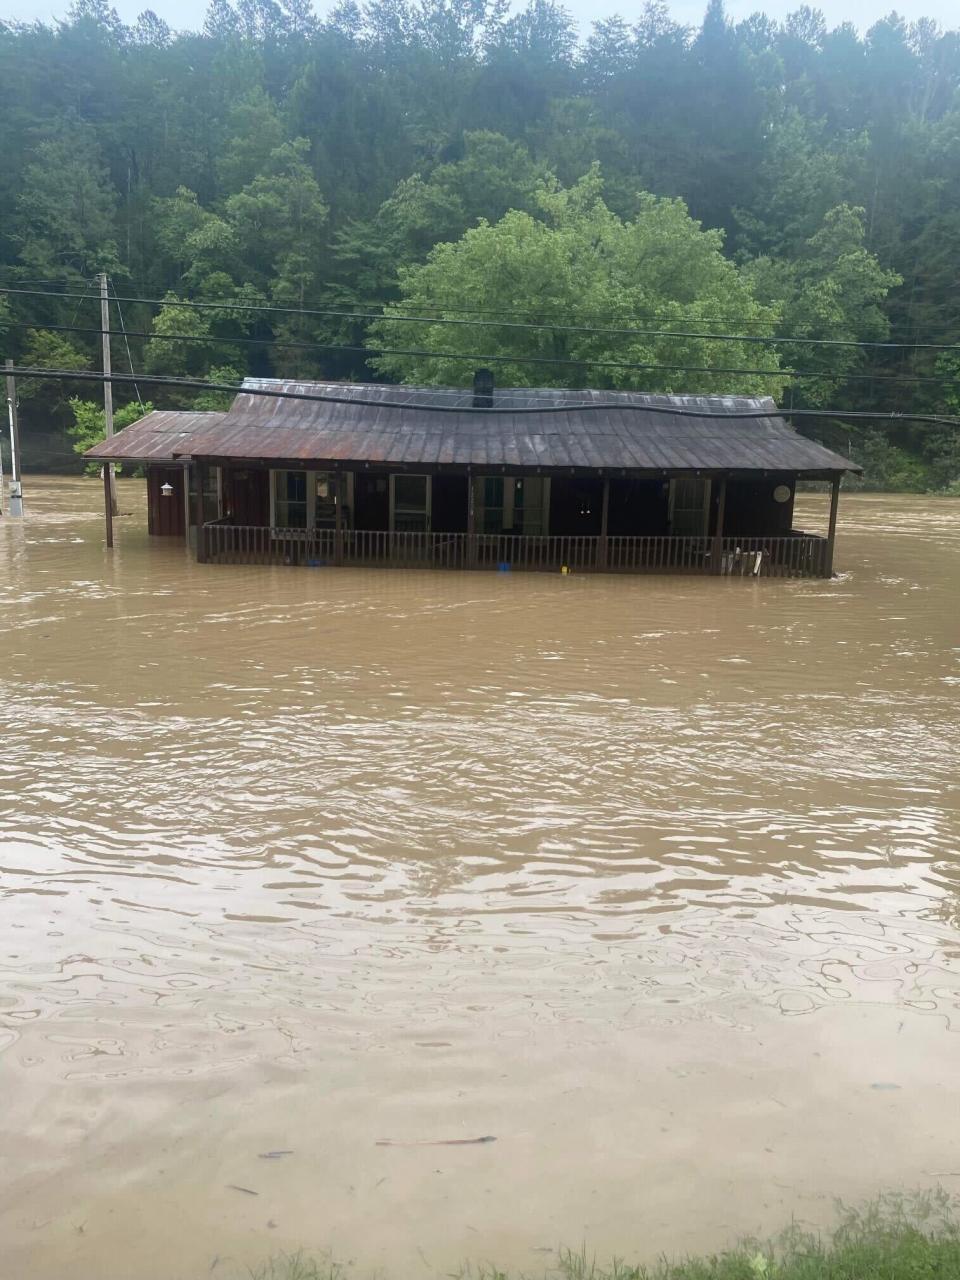 The view of Bolen's grandfather's house during the flood in Knott County, Kentucky, Aug. 2022.<span class="copyright">Shared by Lakyn Bolen</span>